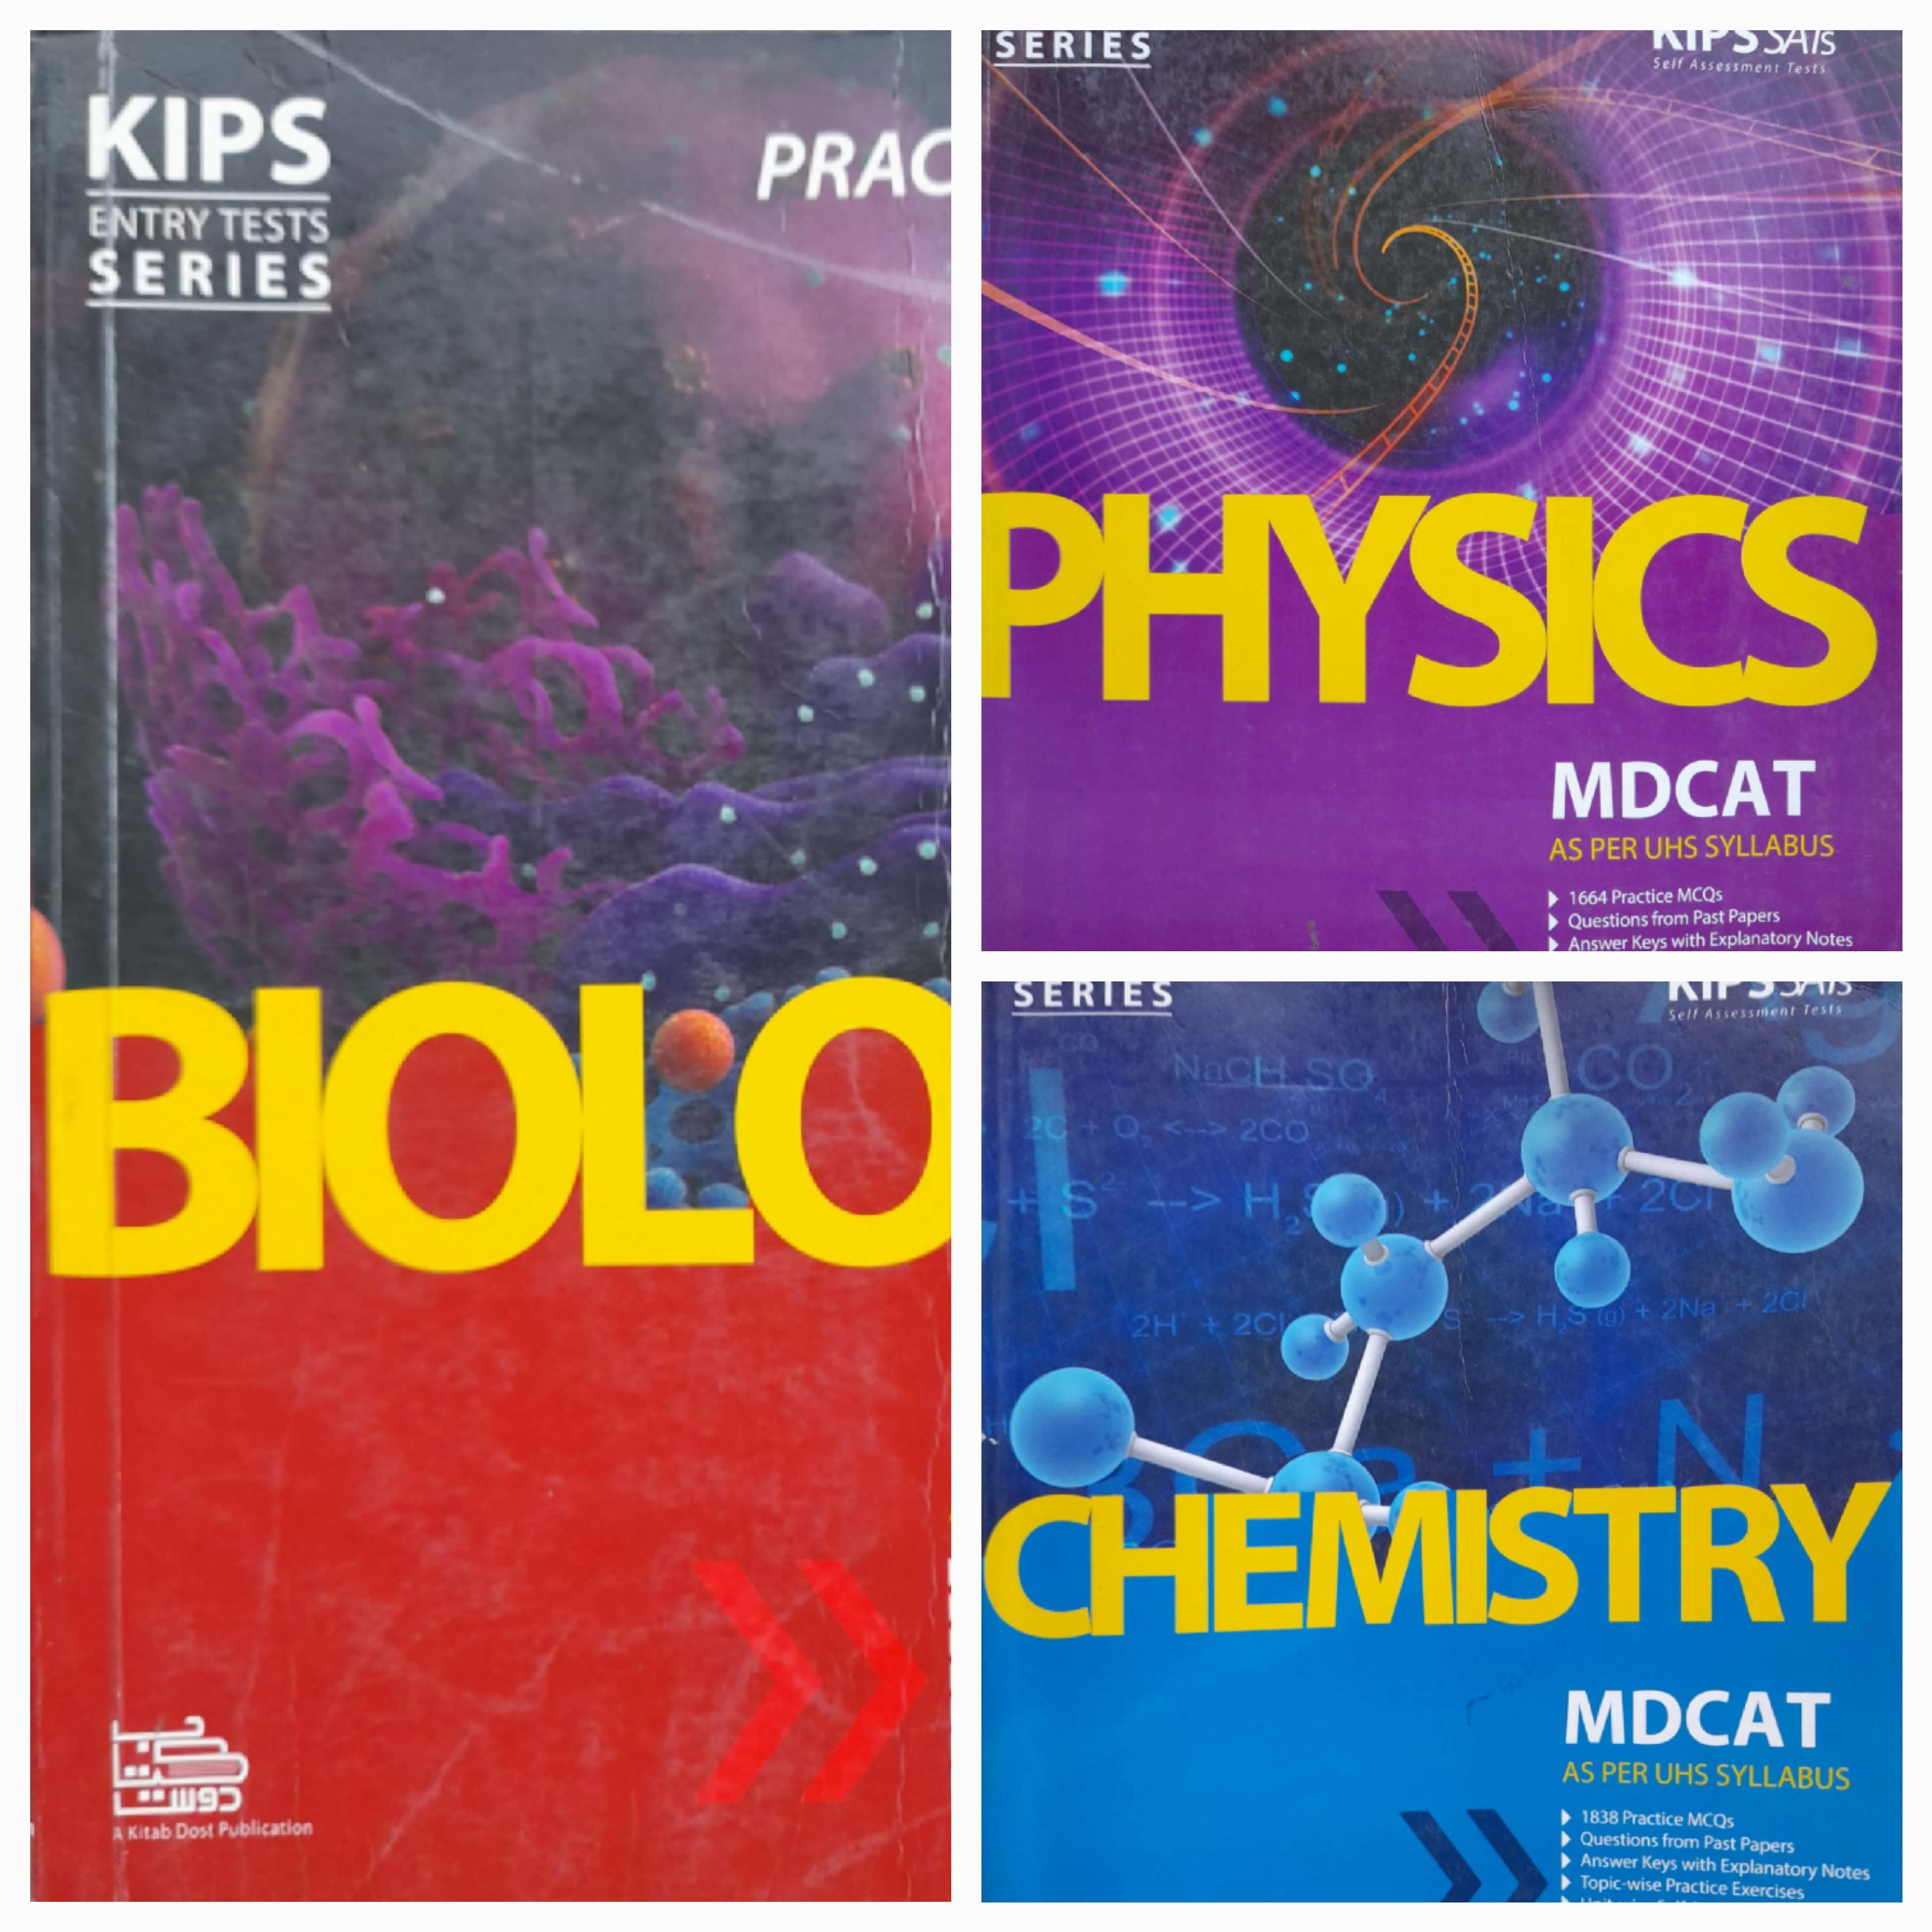 kips mdcat entry test books 10 / condition latest